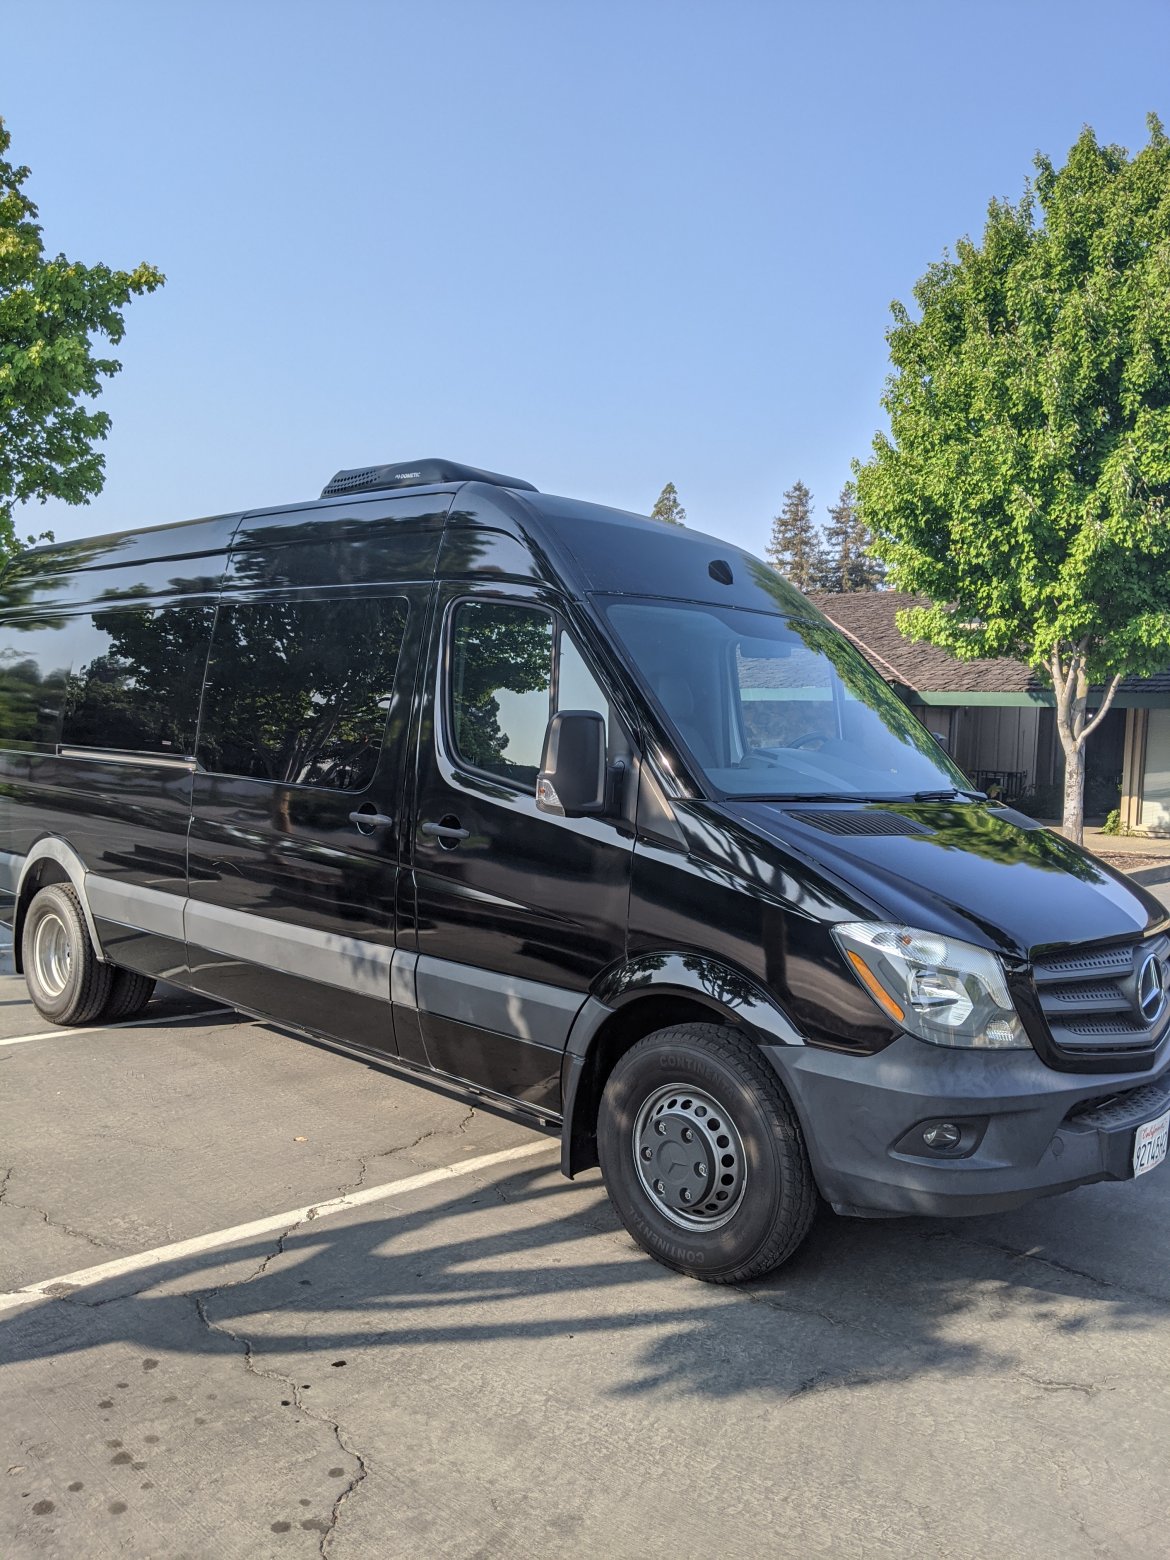 Limo Bus for sale: 2017 Mercedes-Benz Sprinter 3500 by CG Customs